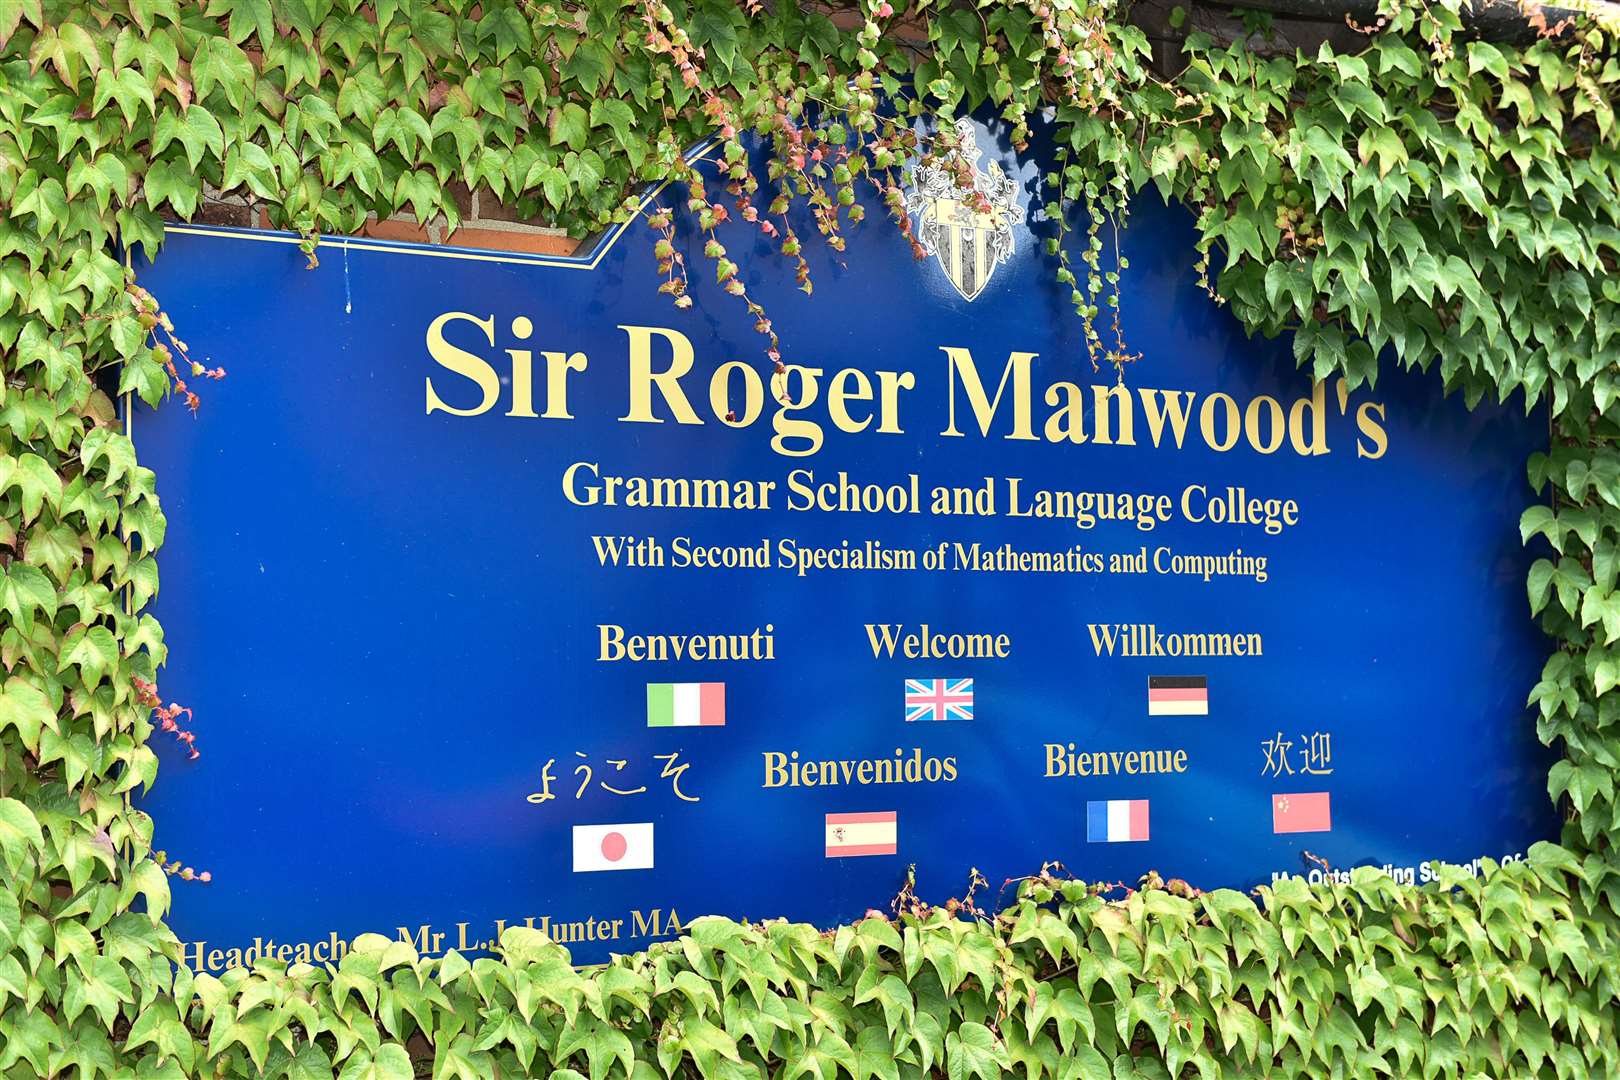 Sir Roger Manwood's School in Sandwich has been targeted in data ransom attack. Picture: Alan Langley